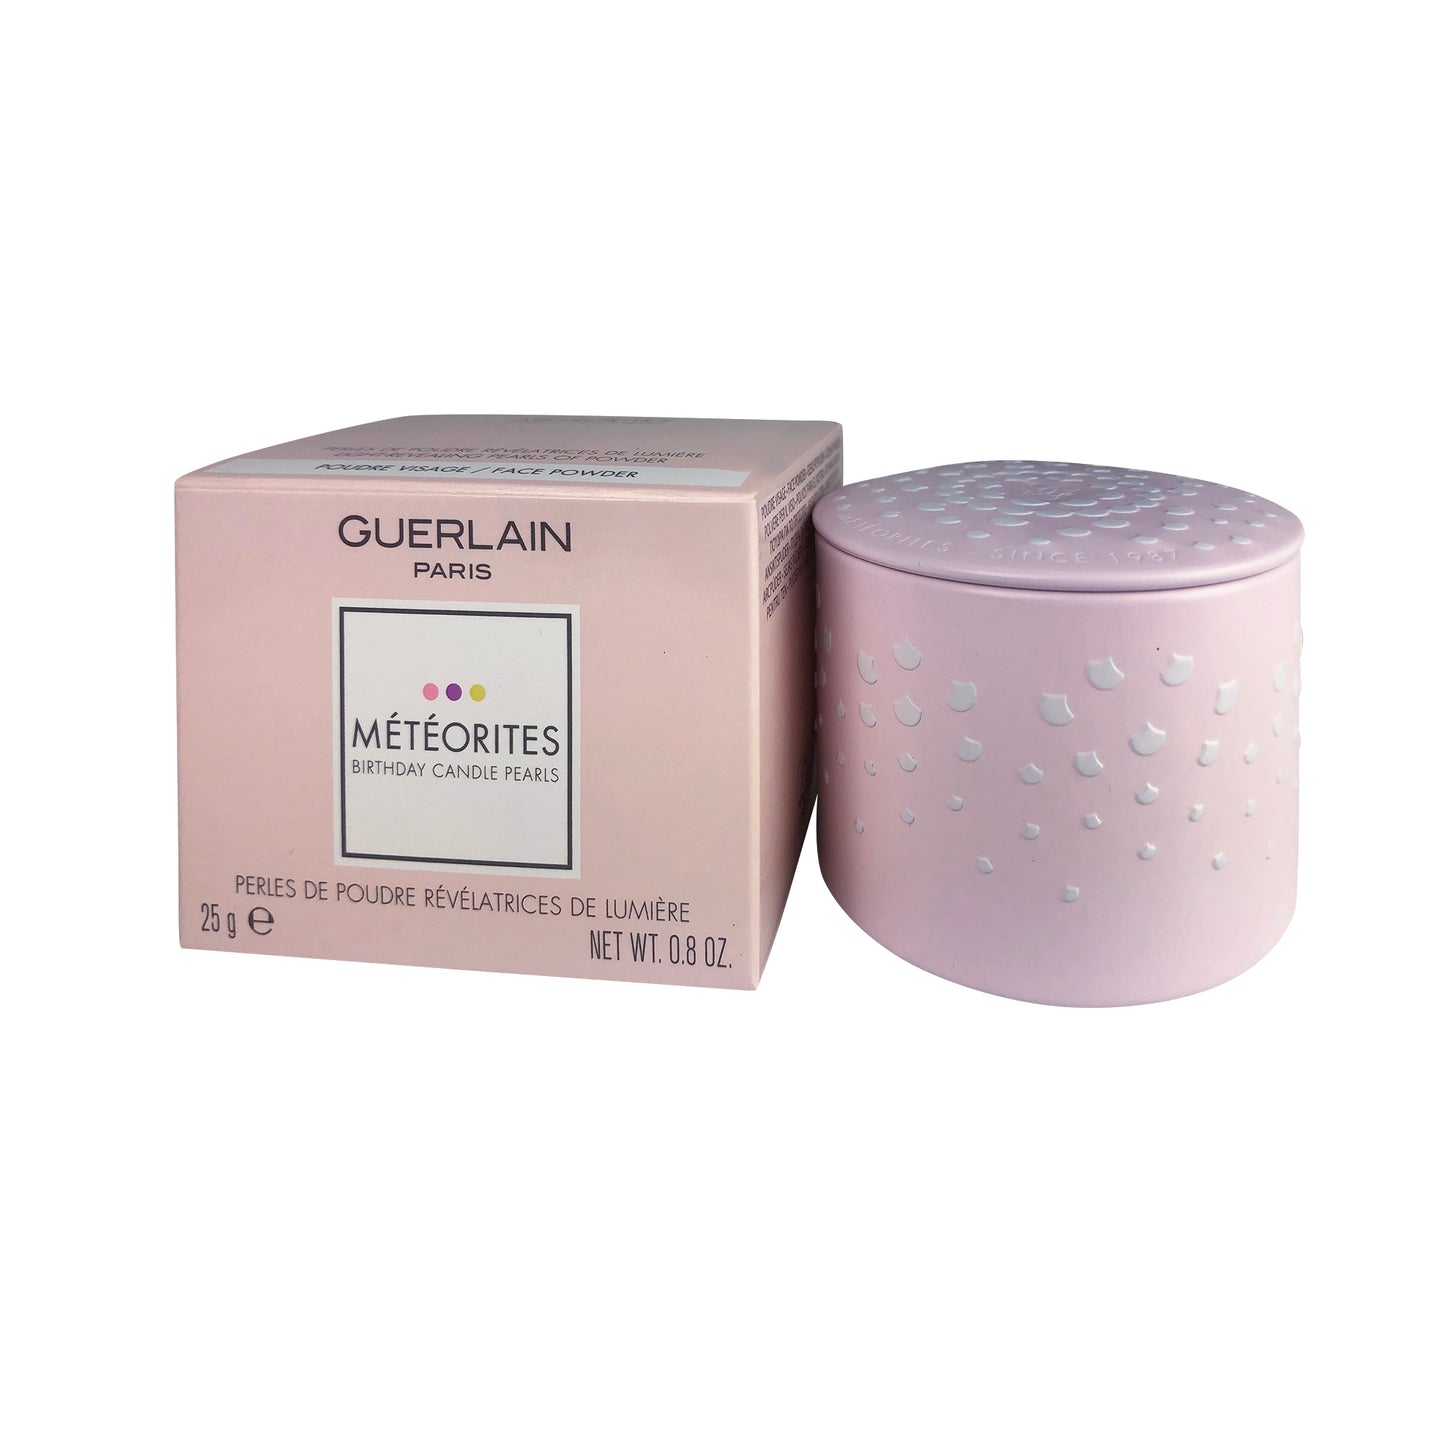 Guerlain Meteorites Birthday Candle Powder Pearls 0.8 oz For The Face